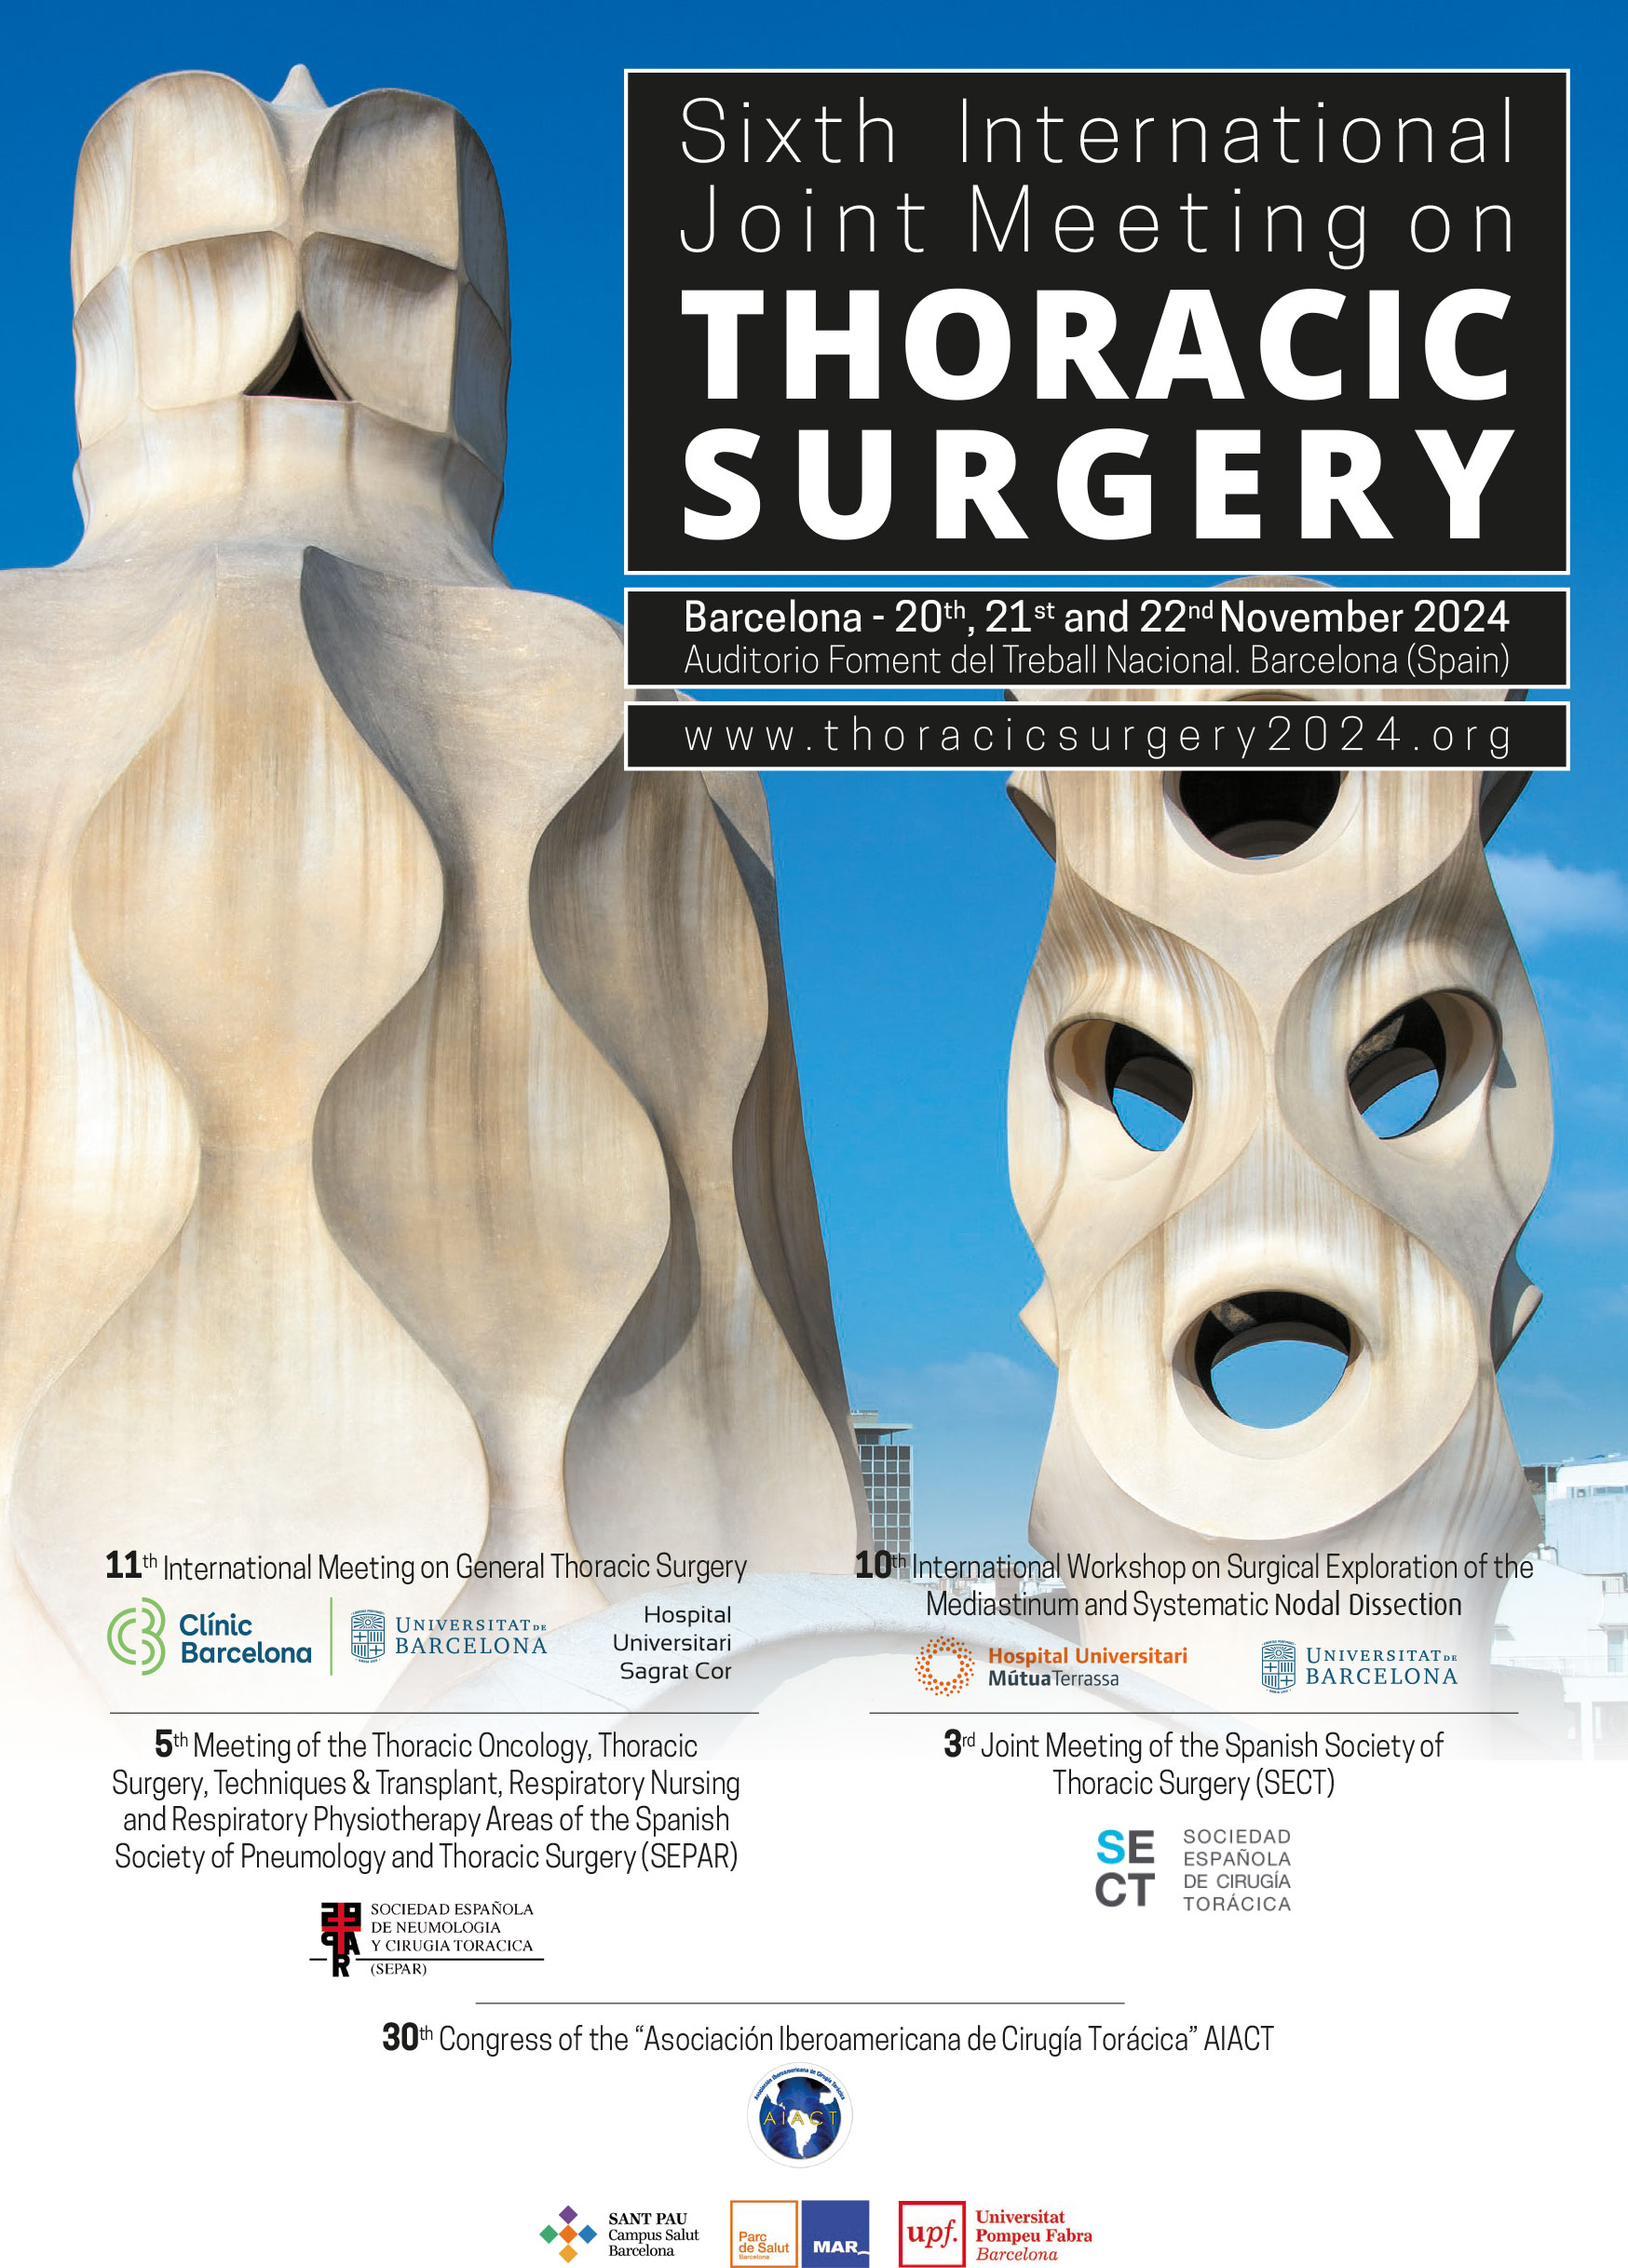 Sixth International Joint Meeting on THORACIC SURGERY 2021